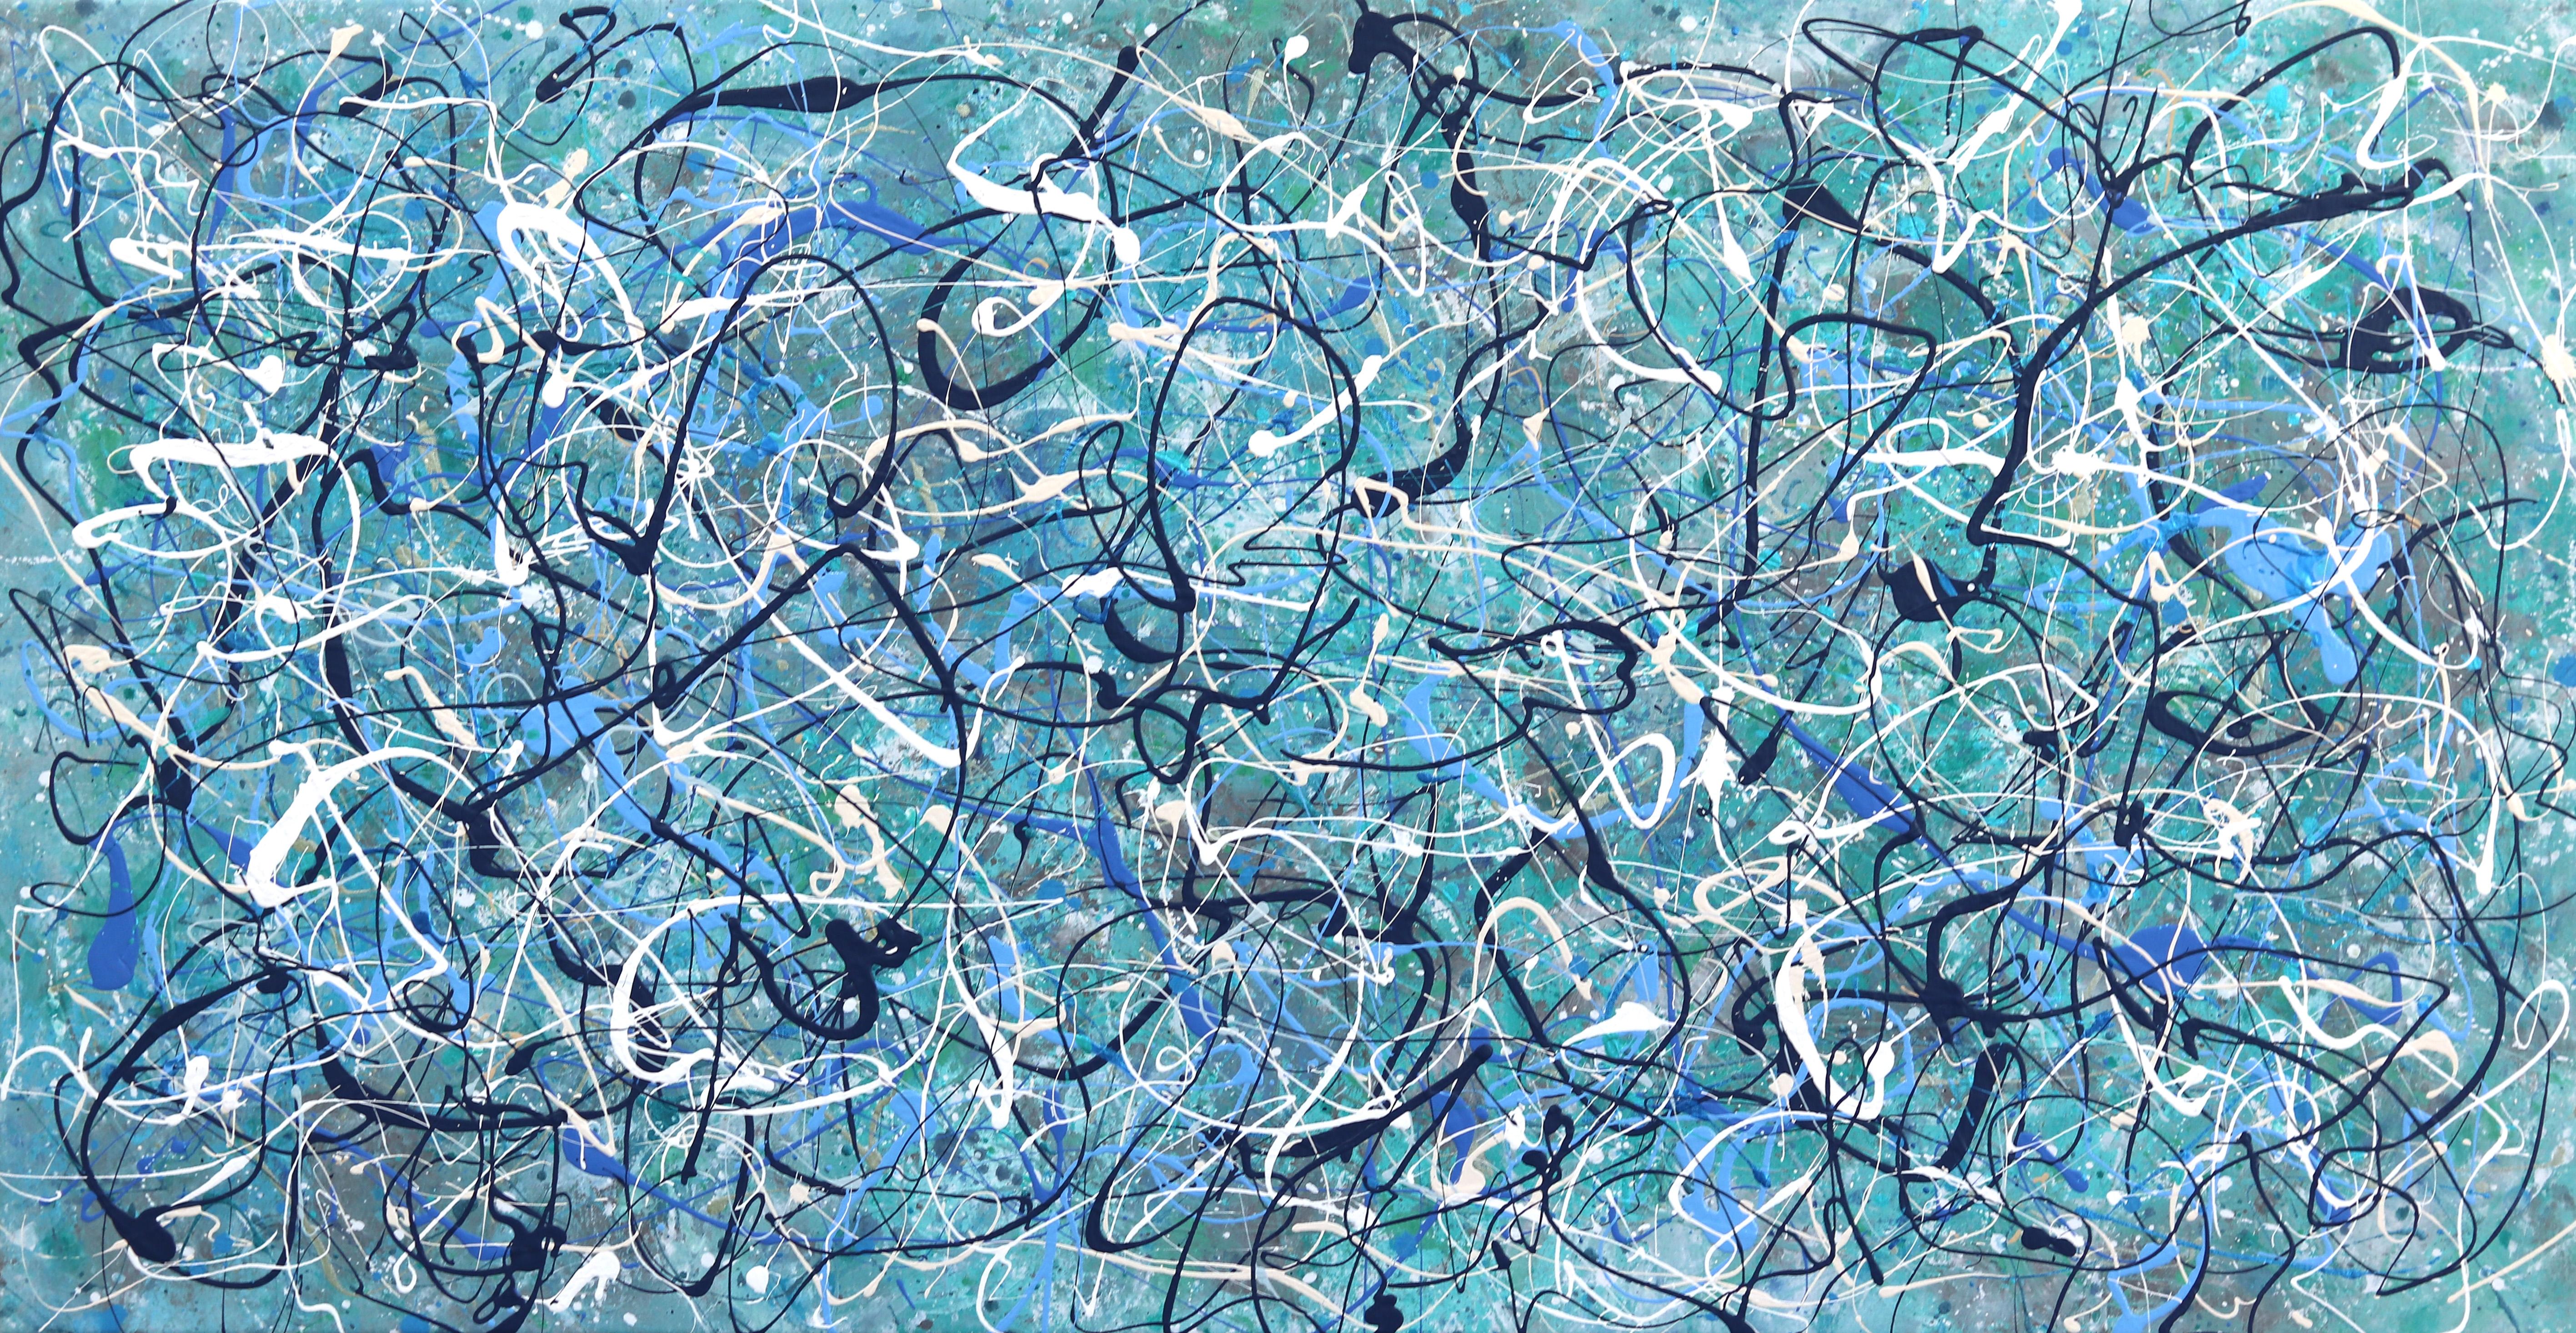 Rhythm in Blue - Unique Abstract Expressionist Original Painting on Canvas - Mixed Media Art by Marc Raphael